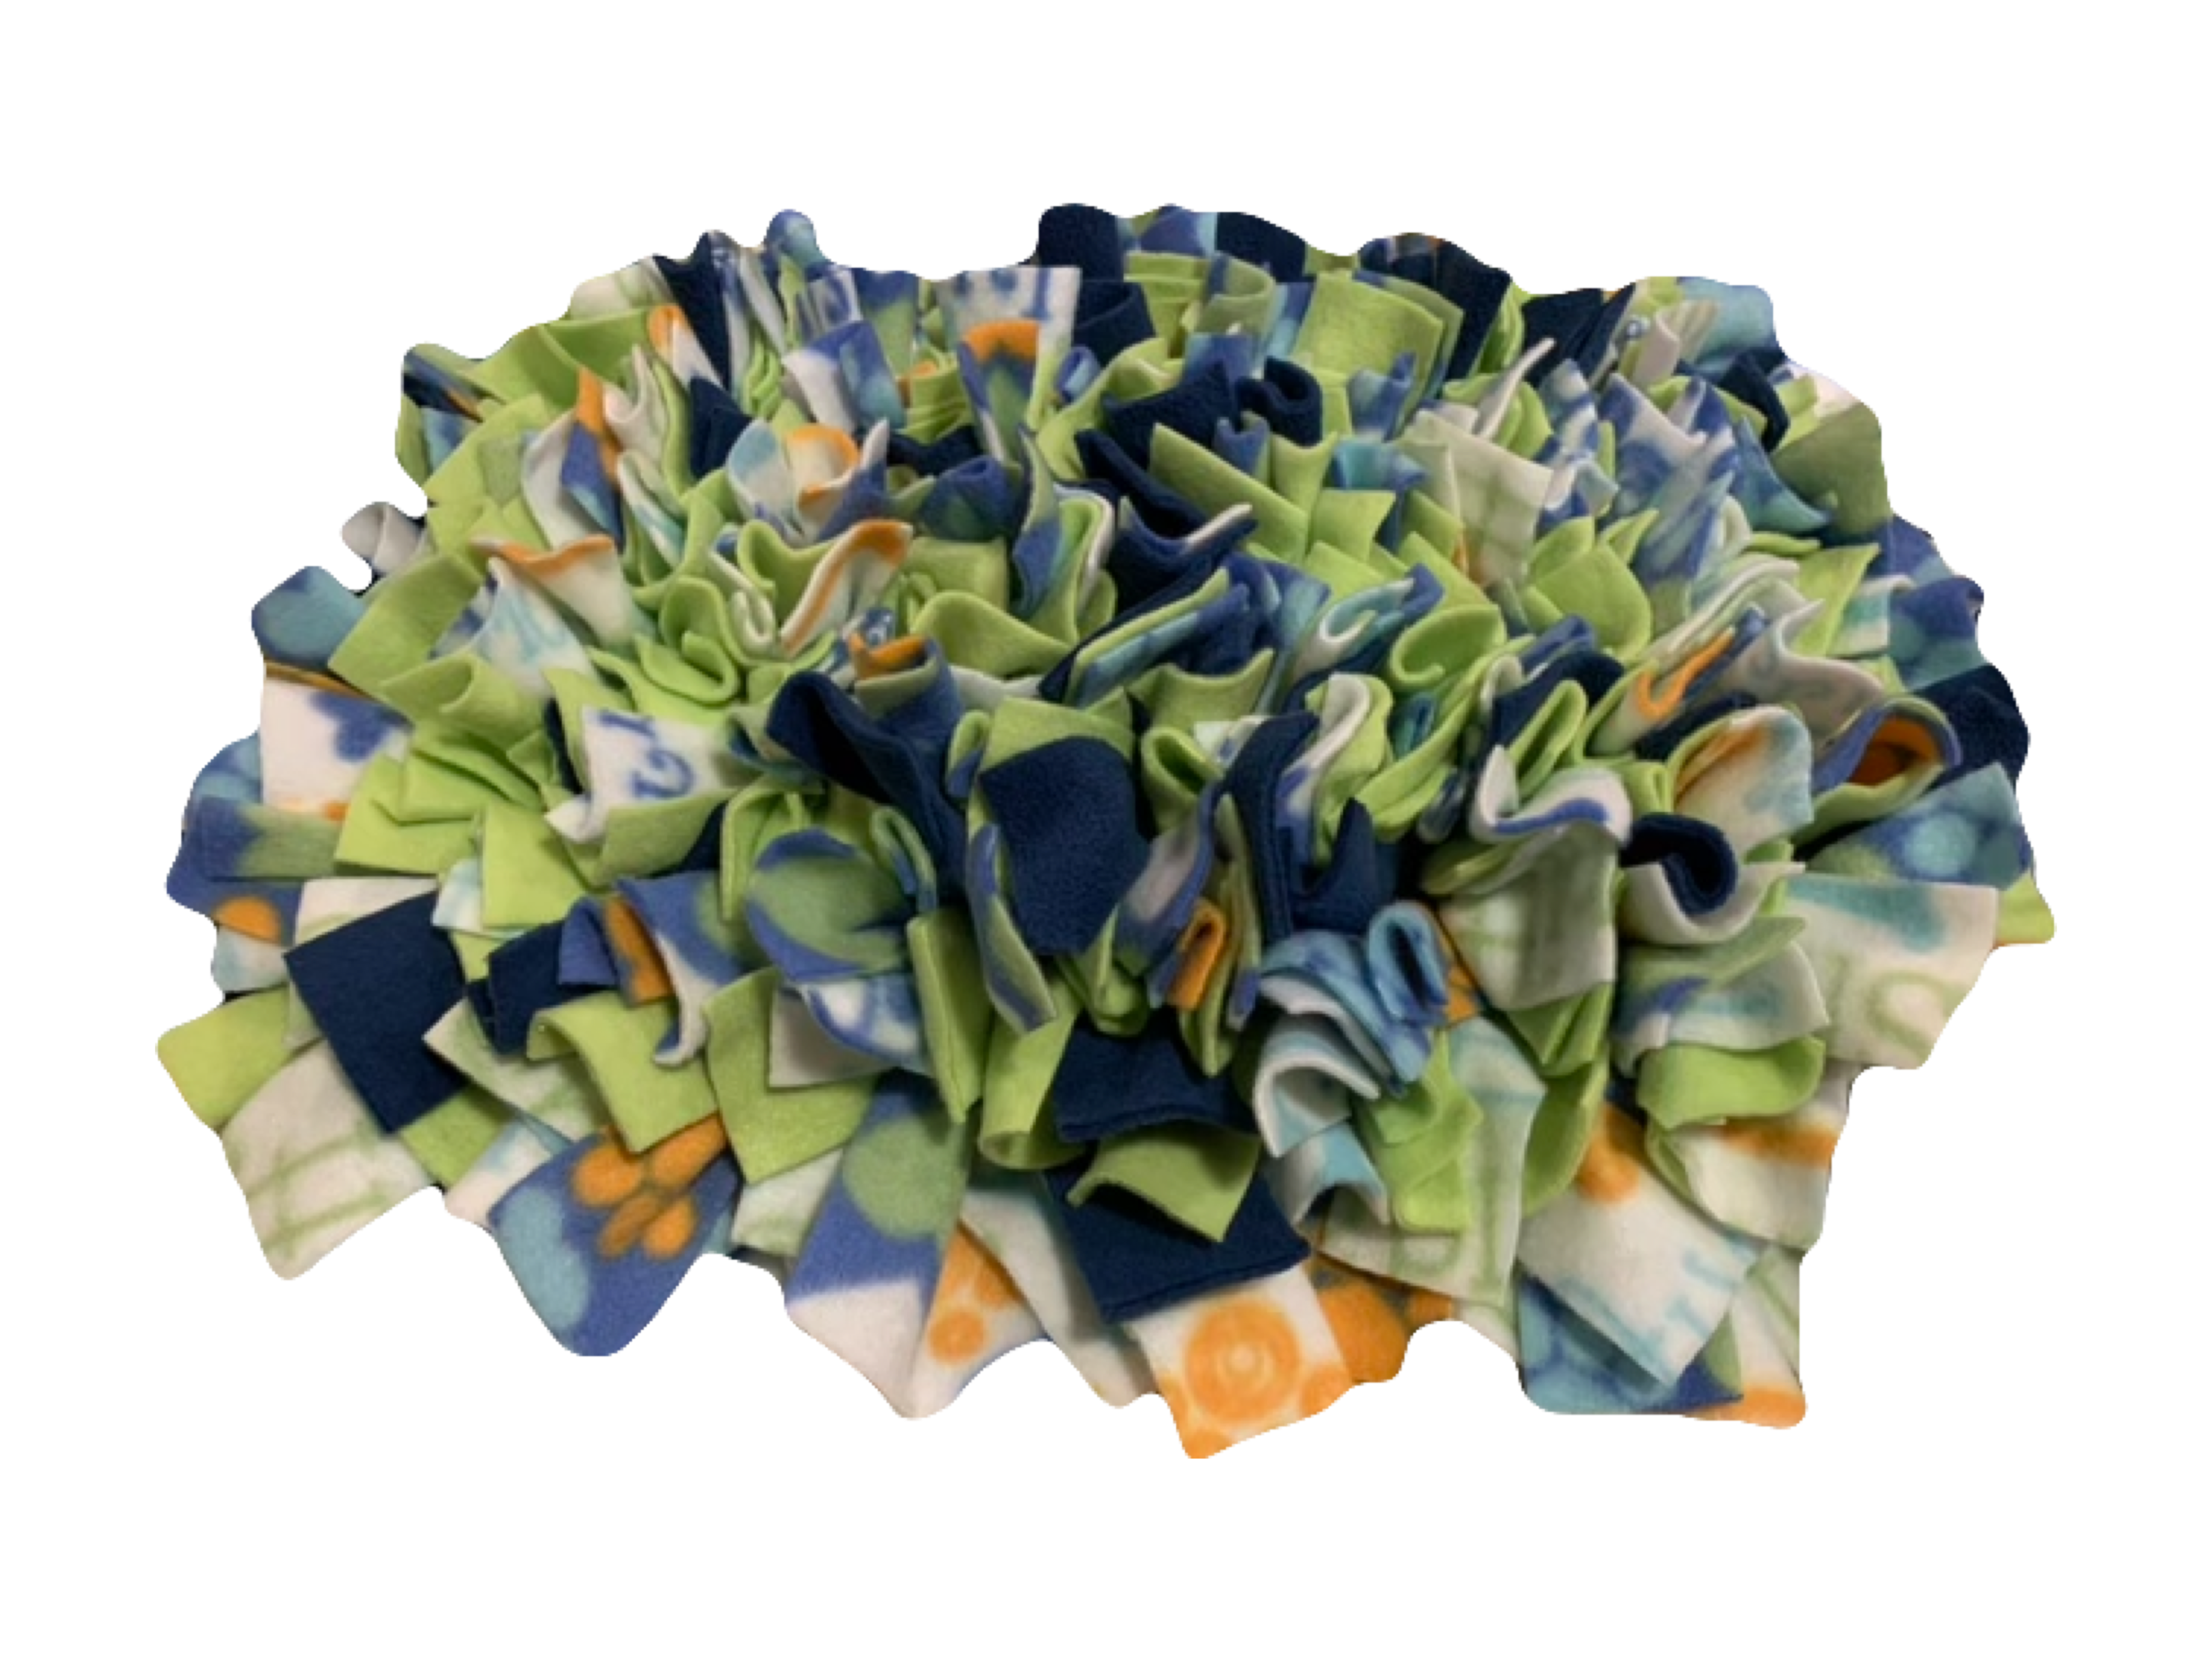 Our handmade multi-colored and multi-patterned snuffle mats are quadruple knotted to keep treats and dry food from falling through to the bottom of the mat. We use a heavy-duty rubber anti-fatigue mat for the base that is heavy, and will not slide around the floor like mats made from cheap plastic sink mats.